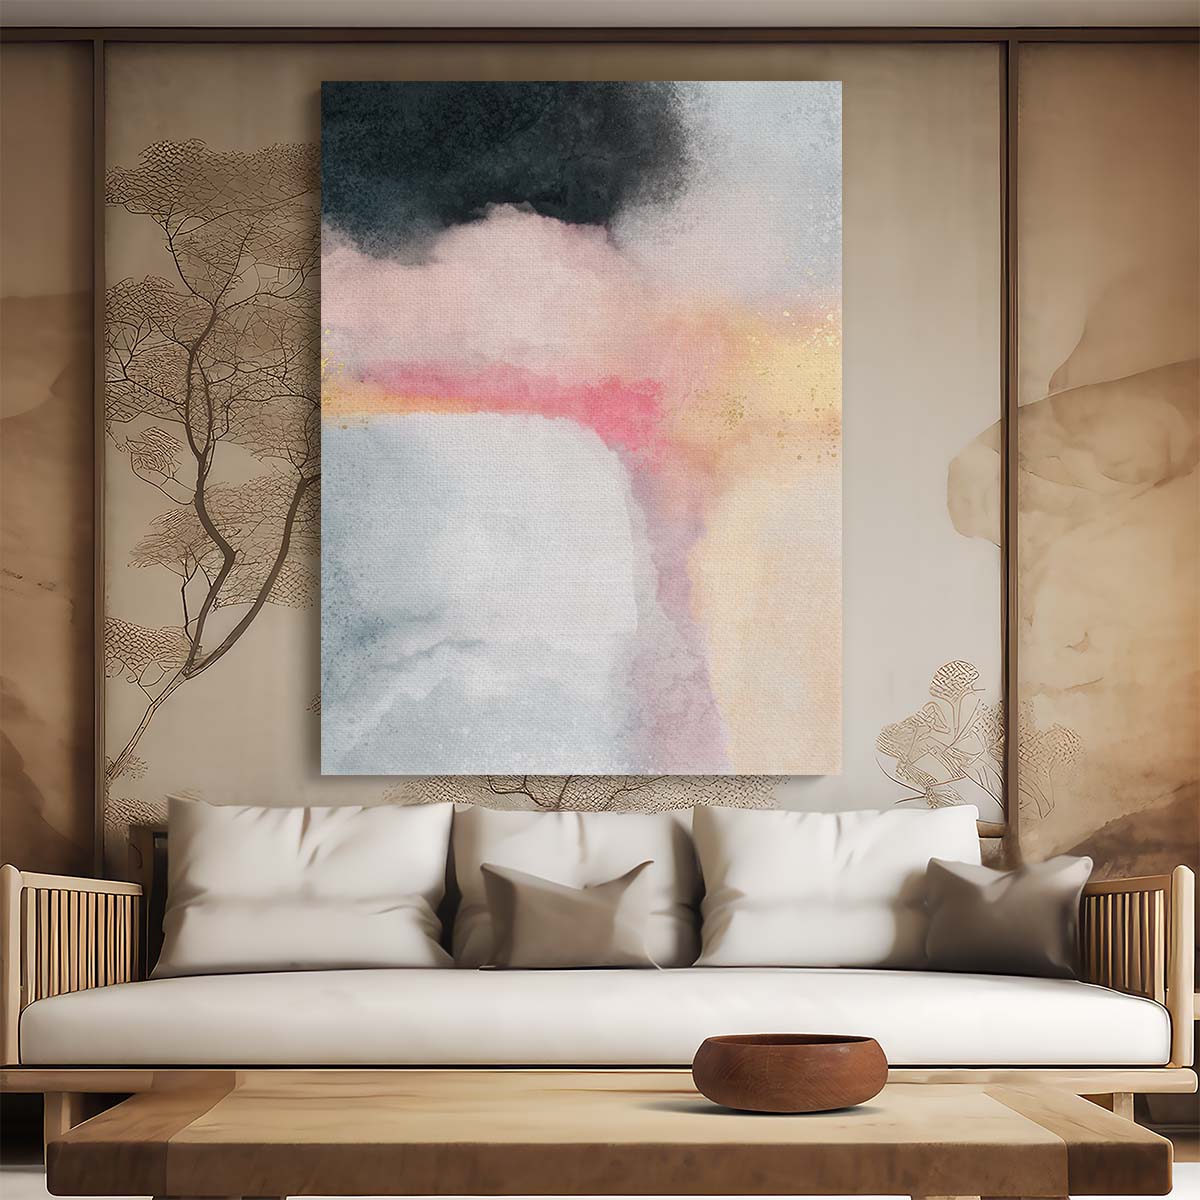 Colorful Watercolor Abstract Illustration by Elisabeth Fredriksson by Luxuriance Designs, made in USA